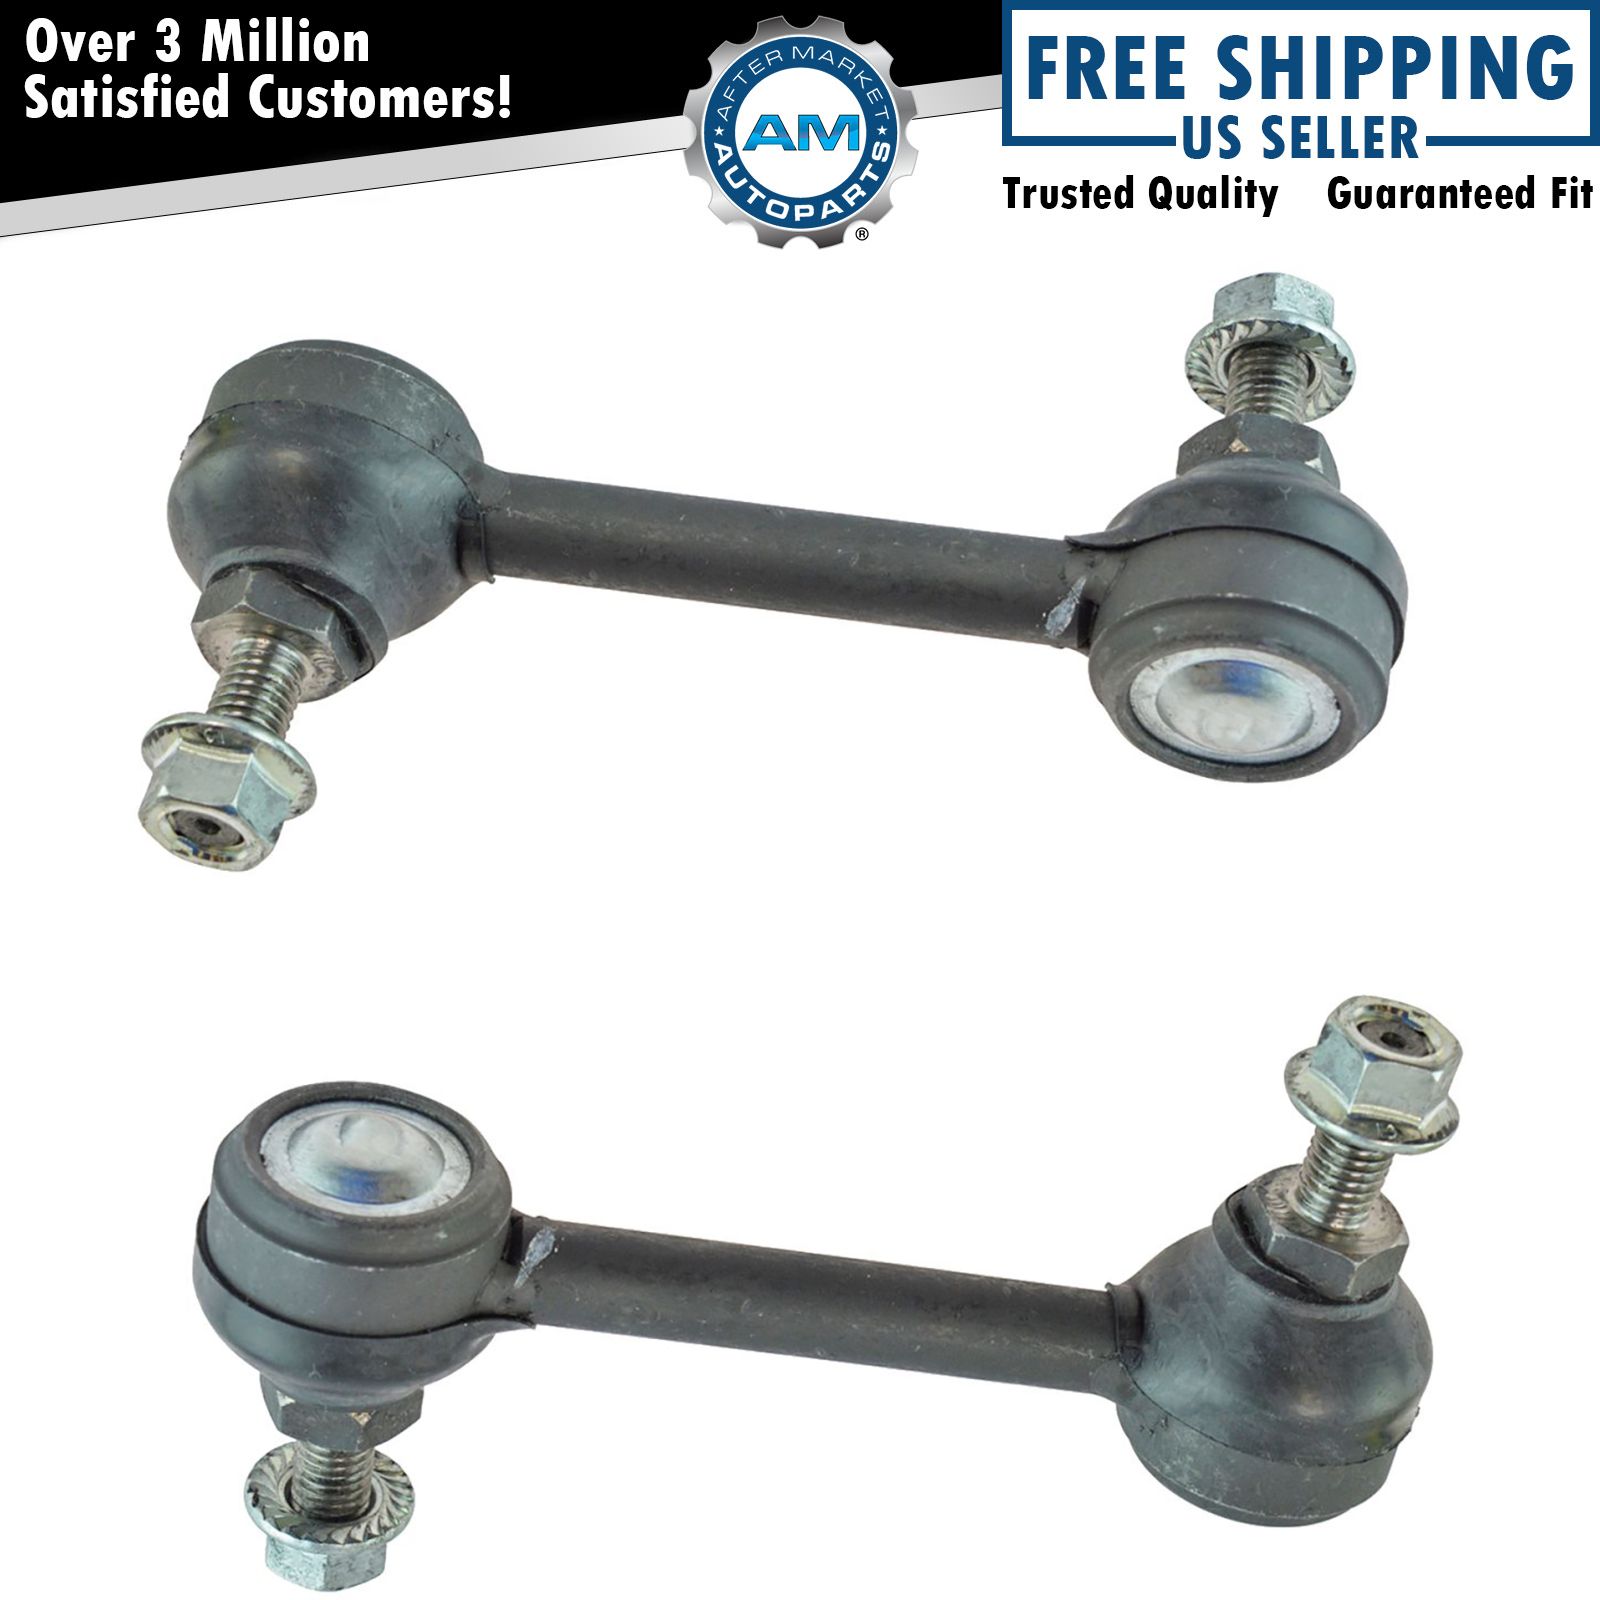 Stabilizer Sway Bar End Link Rear LH RH Pair for Chevy Buick Pontiac Saturn Olds